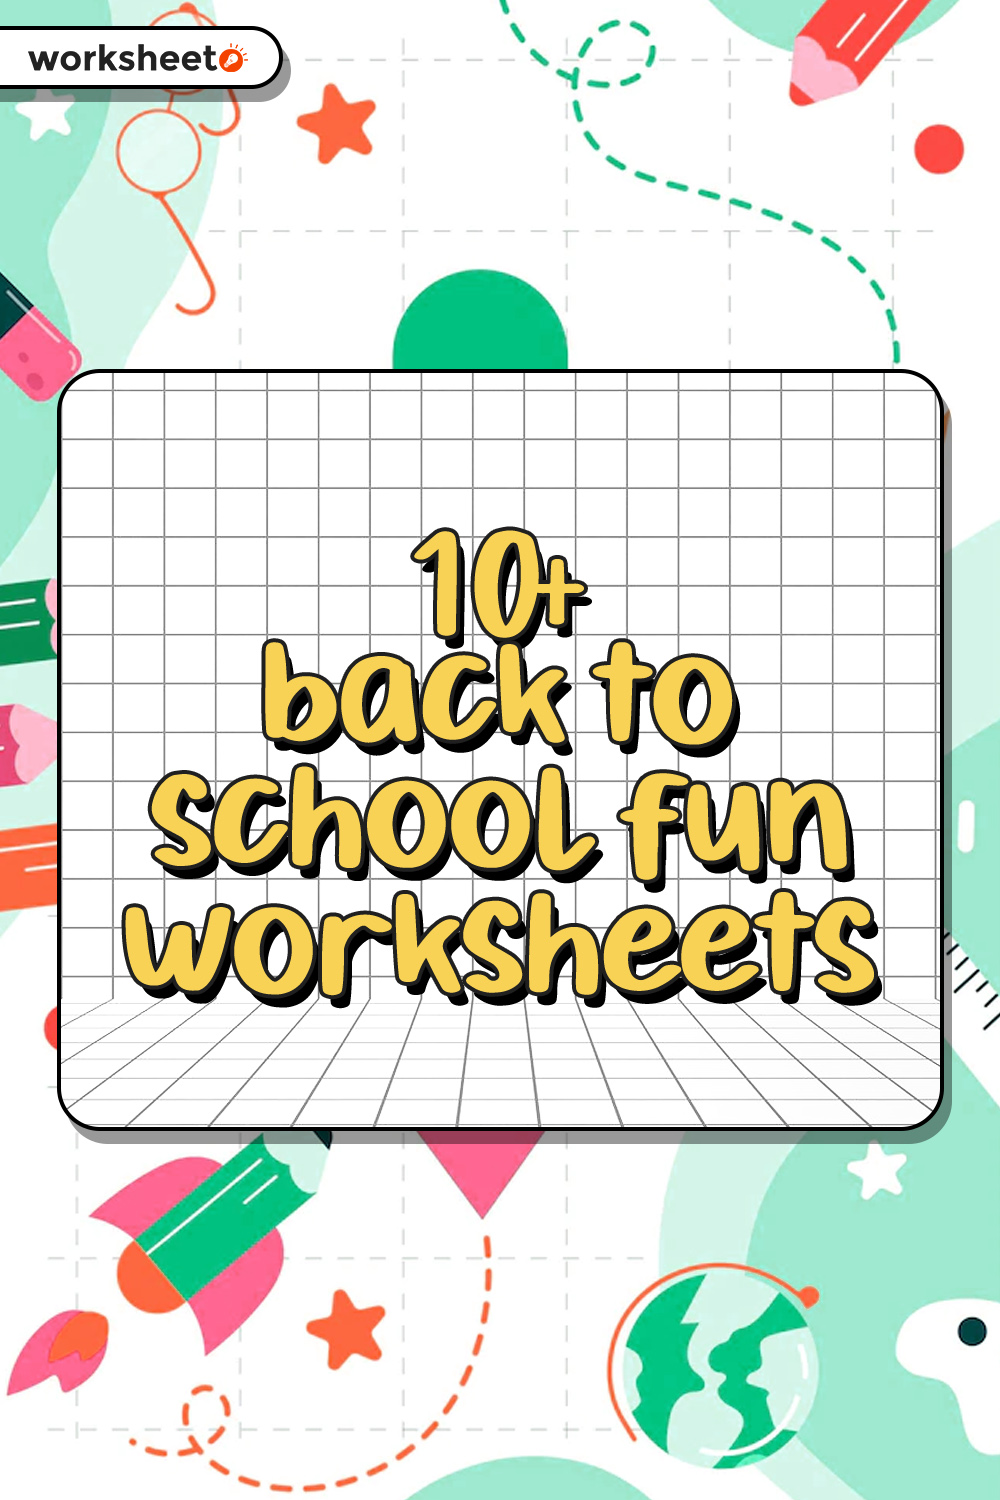 13 Images of Back To School Fun Worksheets